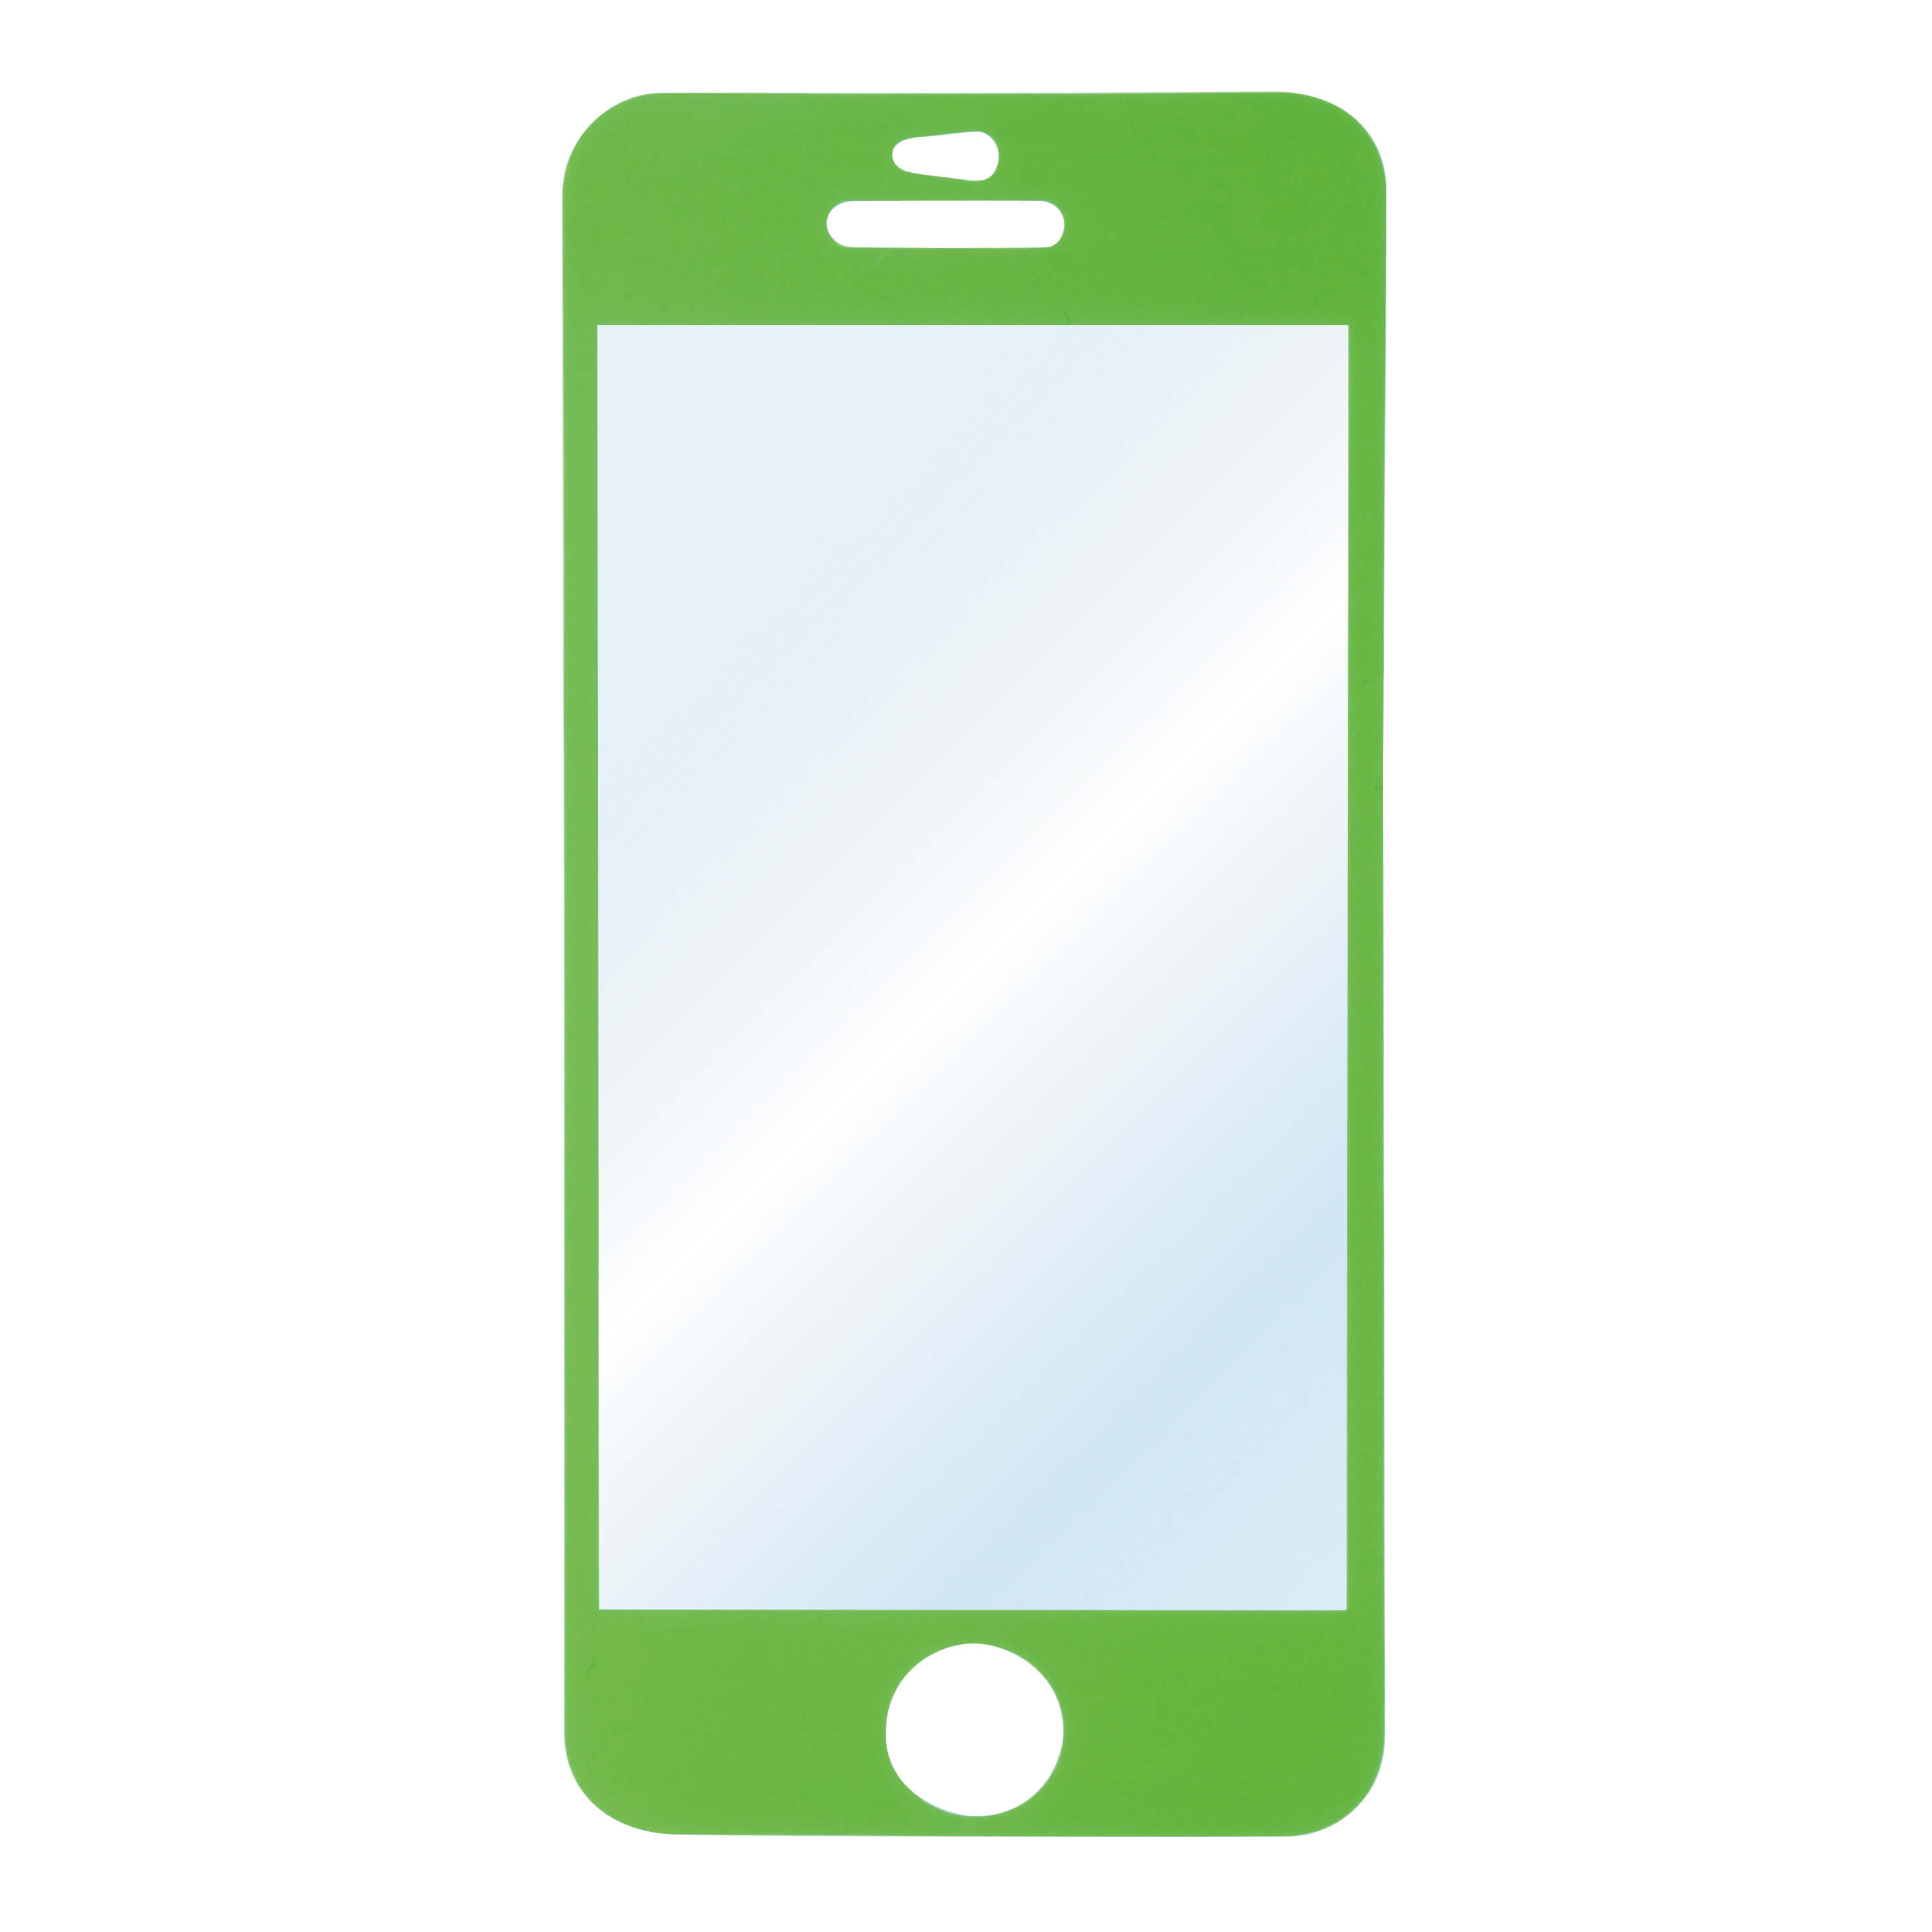 Color Screen Protector for Ap ple iPhone 5c, green